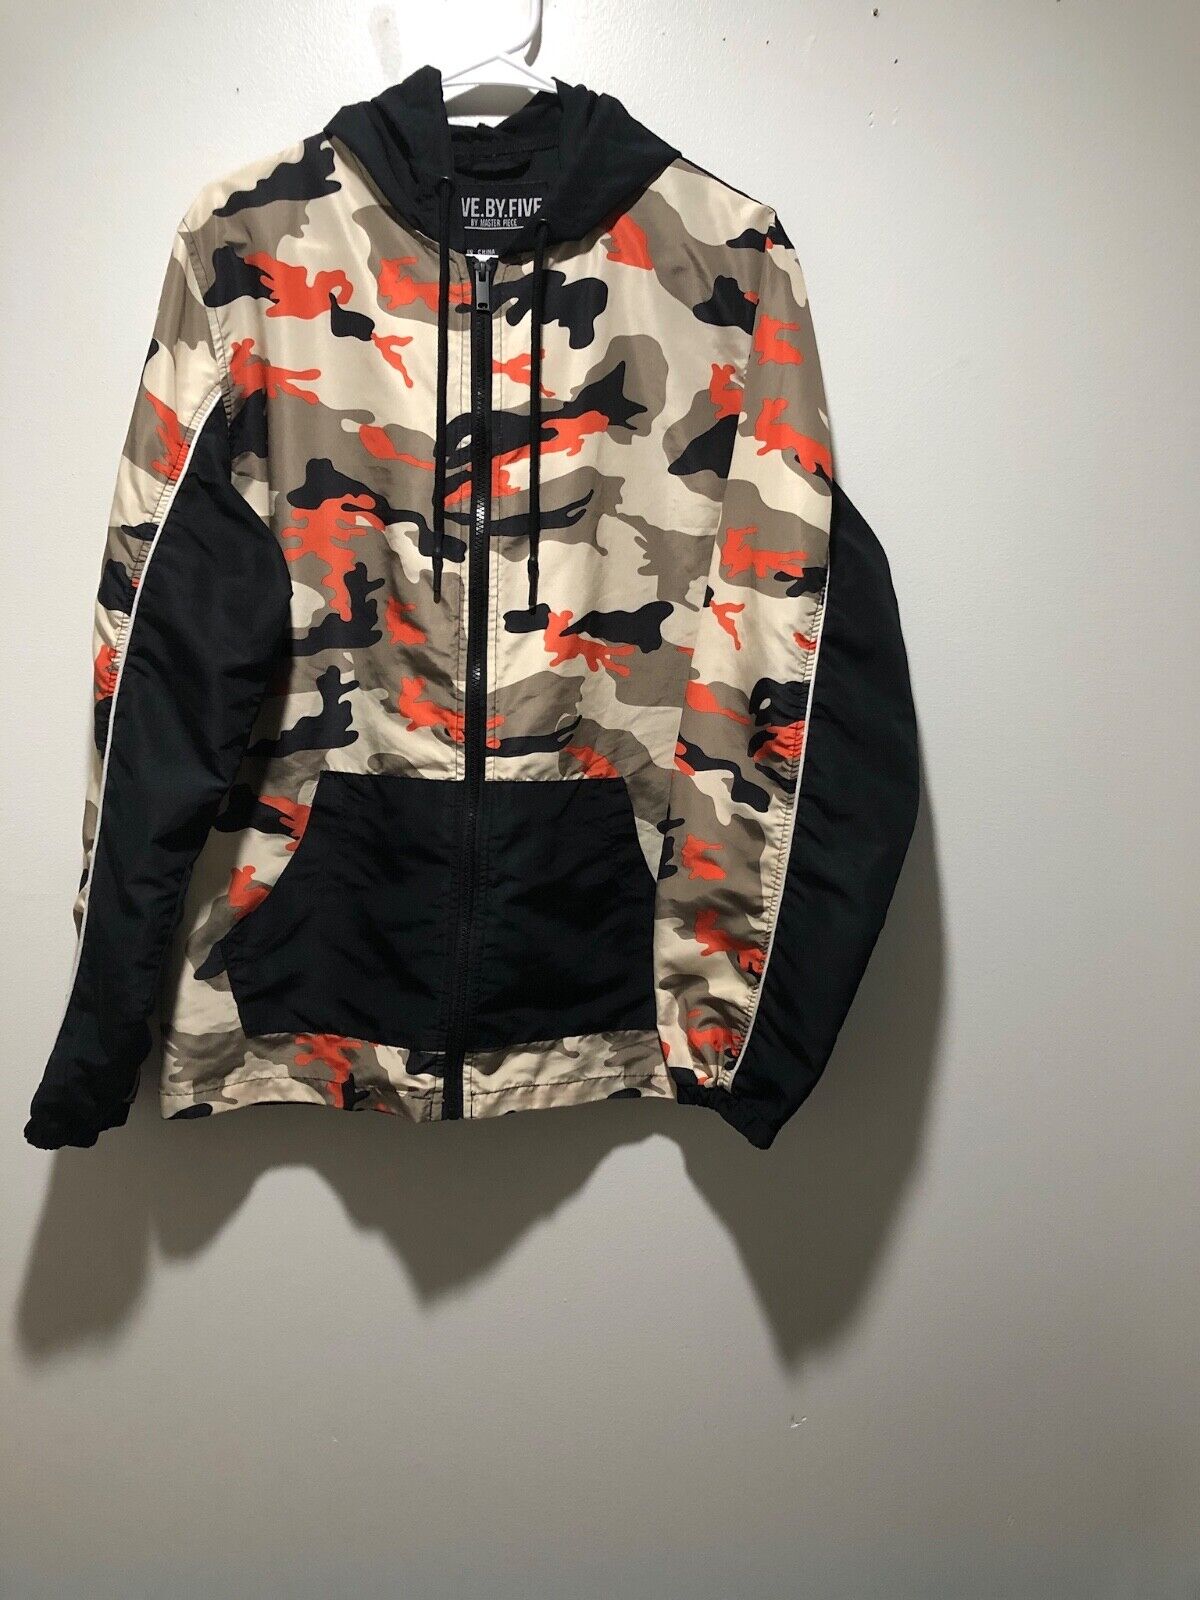 Five by Five Camouflage Windbreaker by Masterpiece - image 1